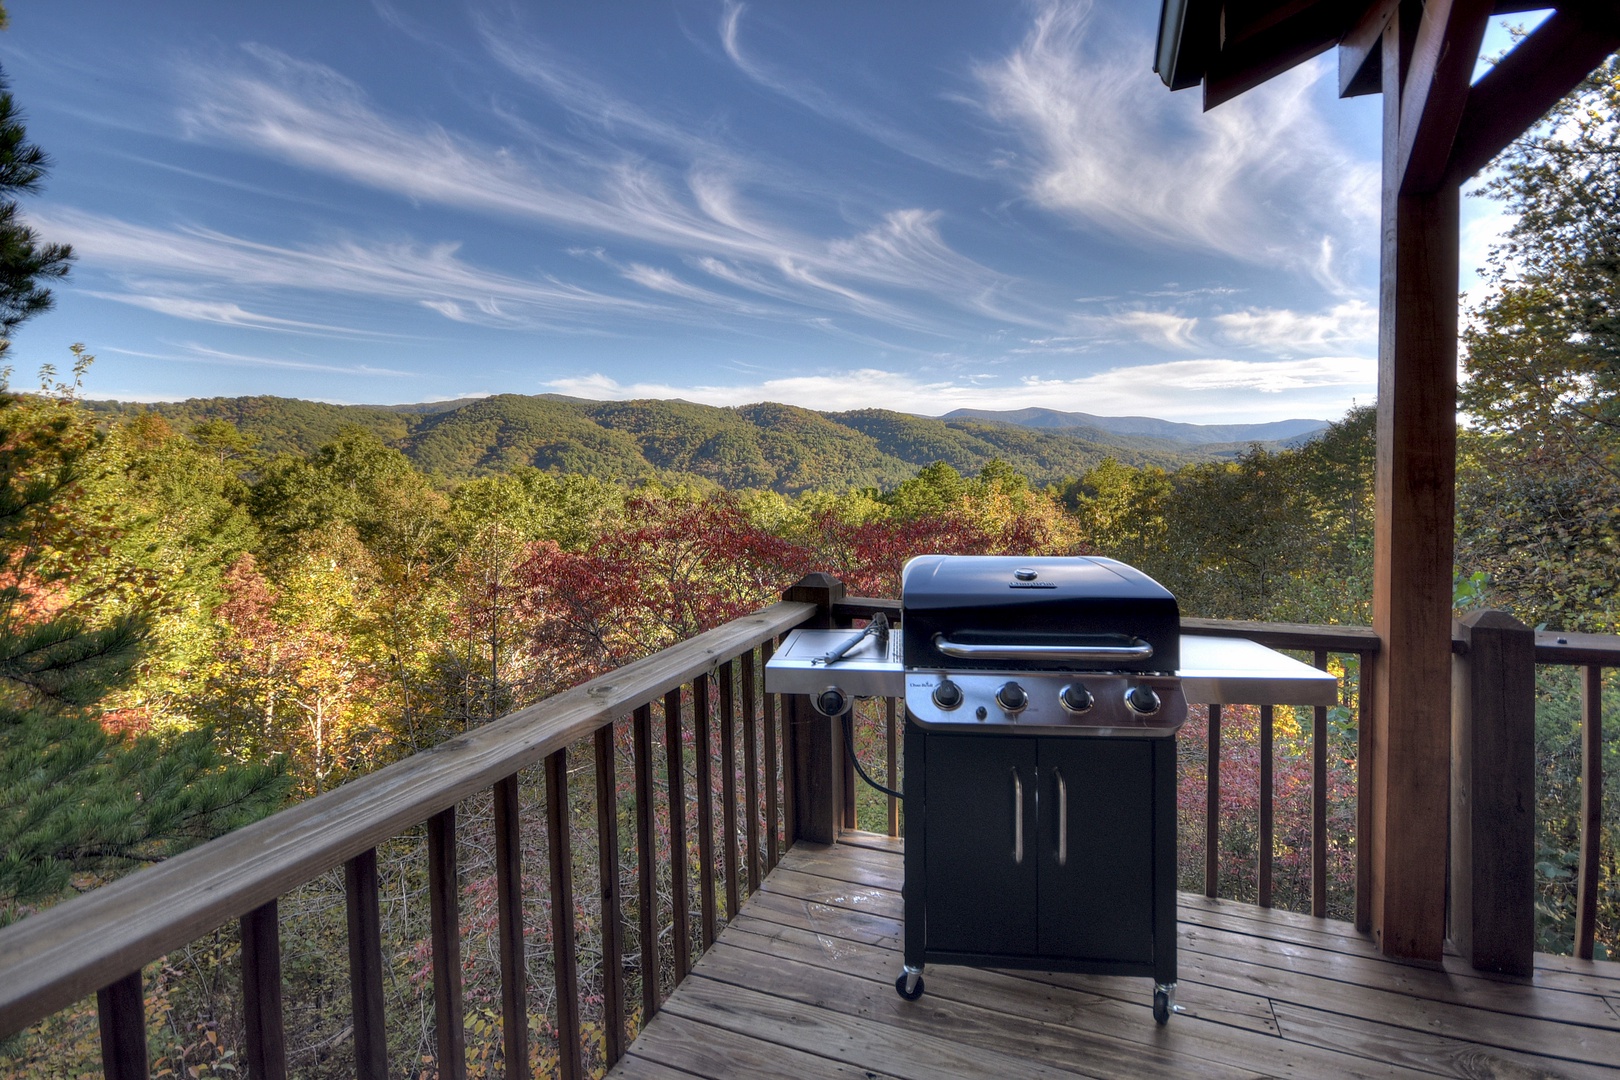 The Good Place- Deck area with a grill and long range mountain views